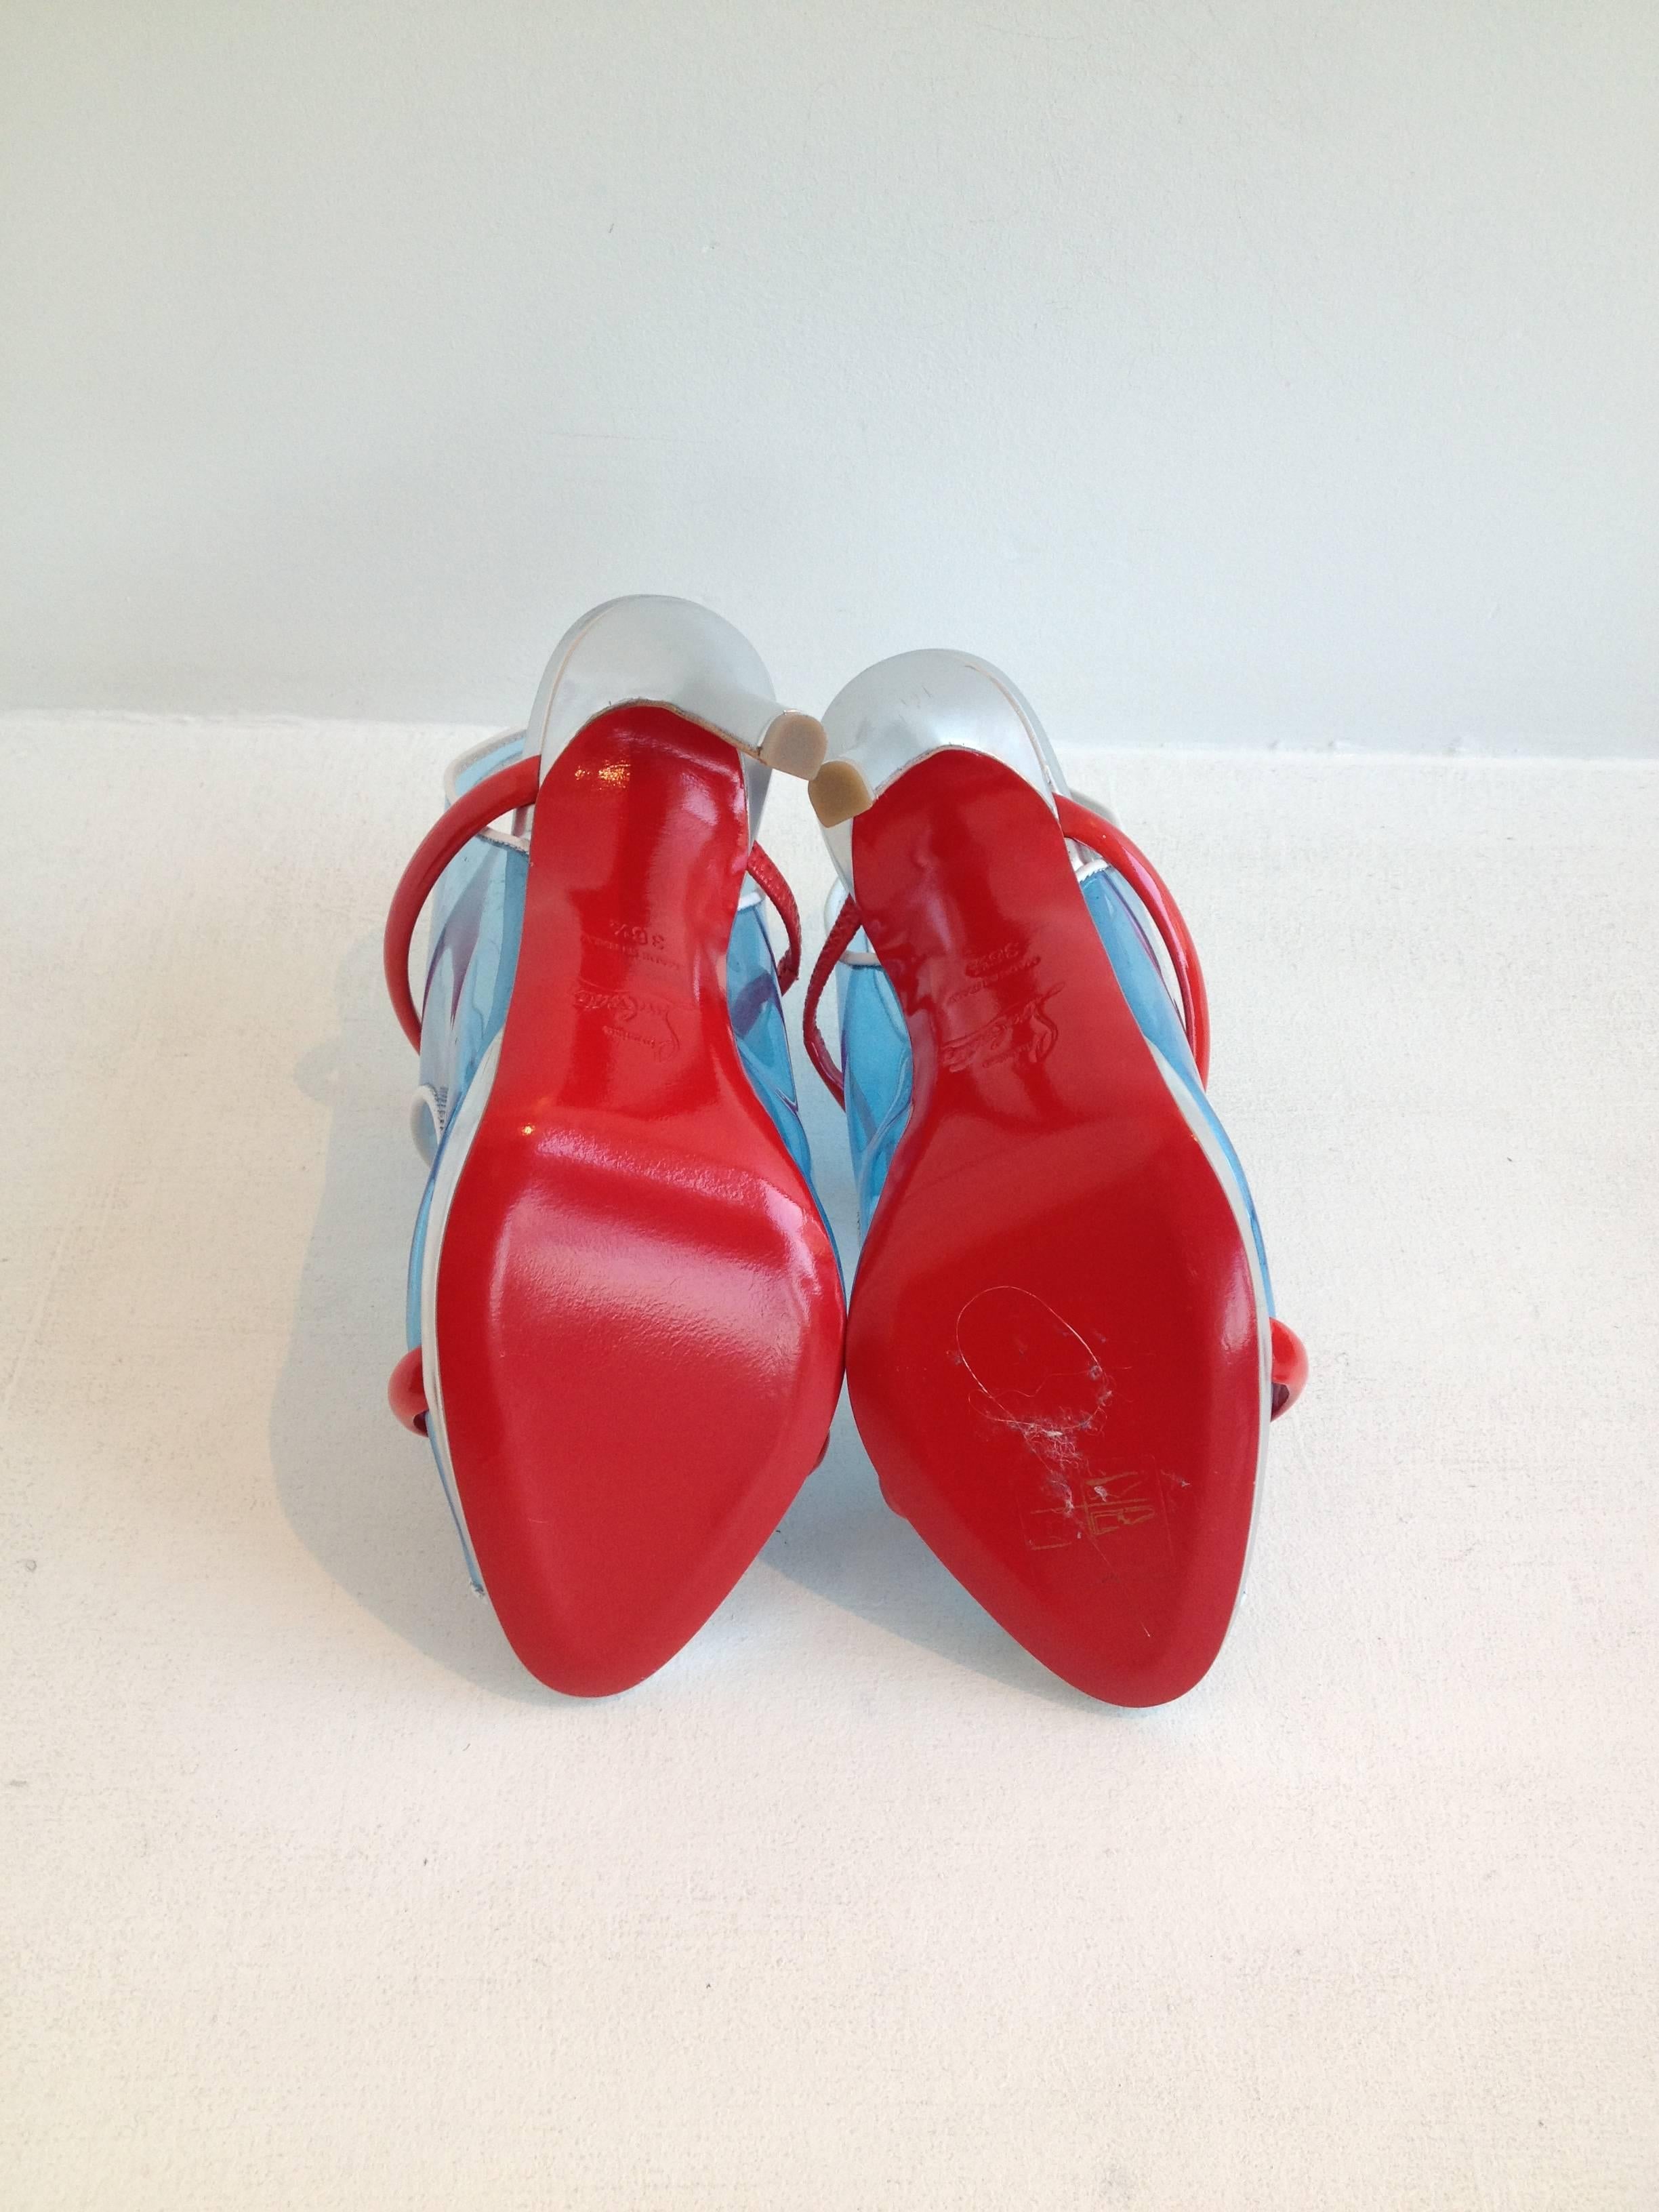 Christian Louboutin Translucent Blue Heels Size 36.5 (6) For Sale 3